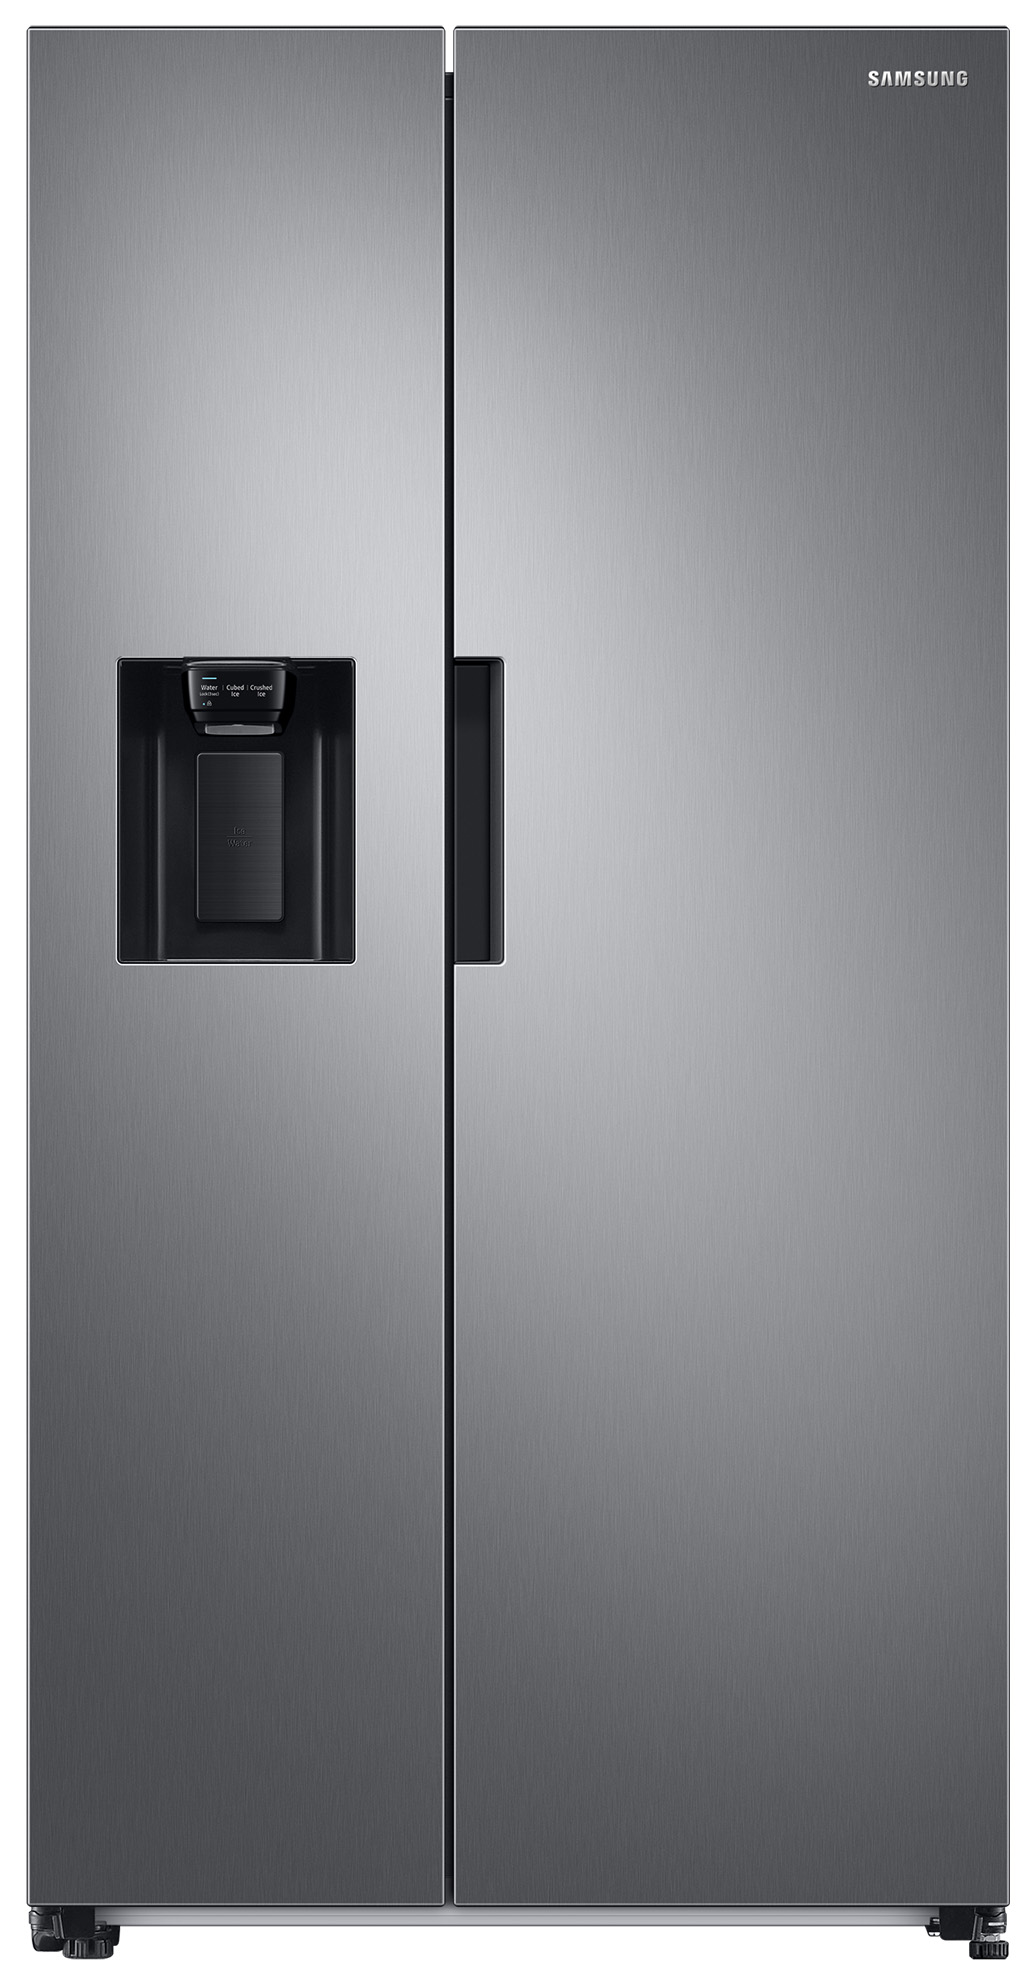 Samsung RS67A8811S9/EU Water & Ice Dispenser E-Rated American Style Fridge Freezer - Stainless Steel